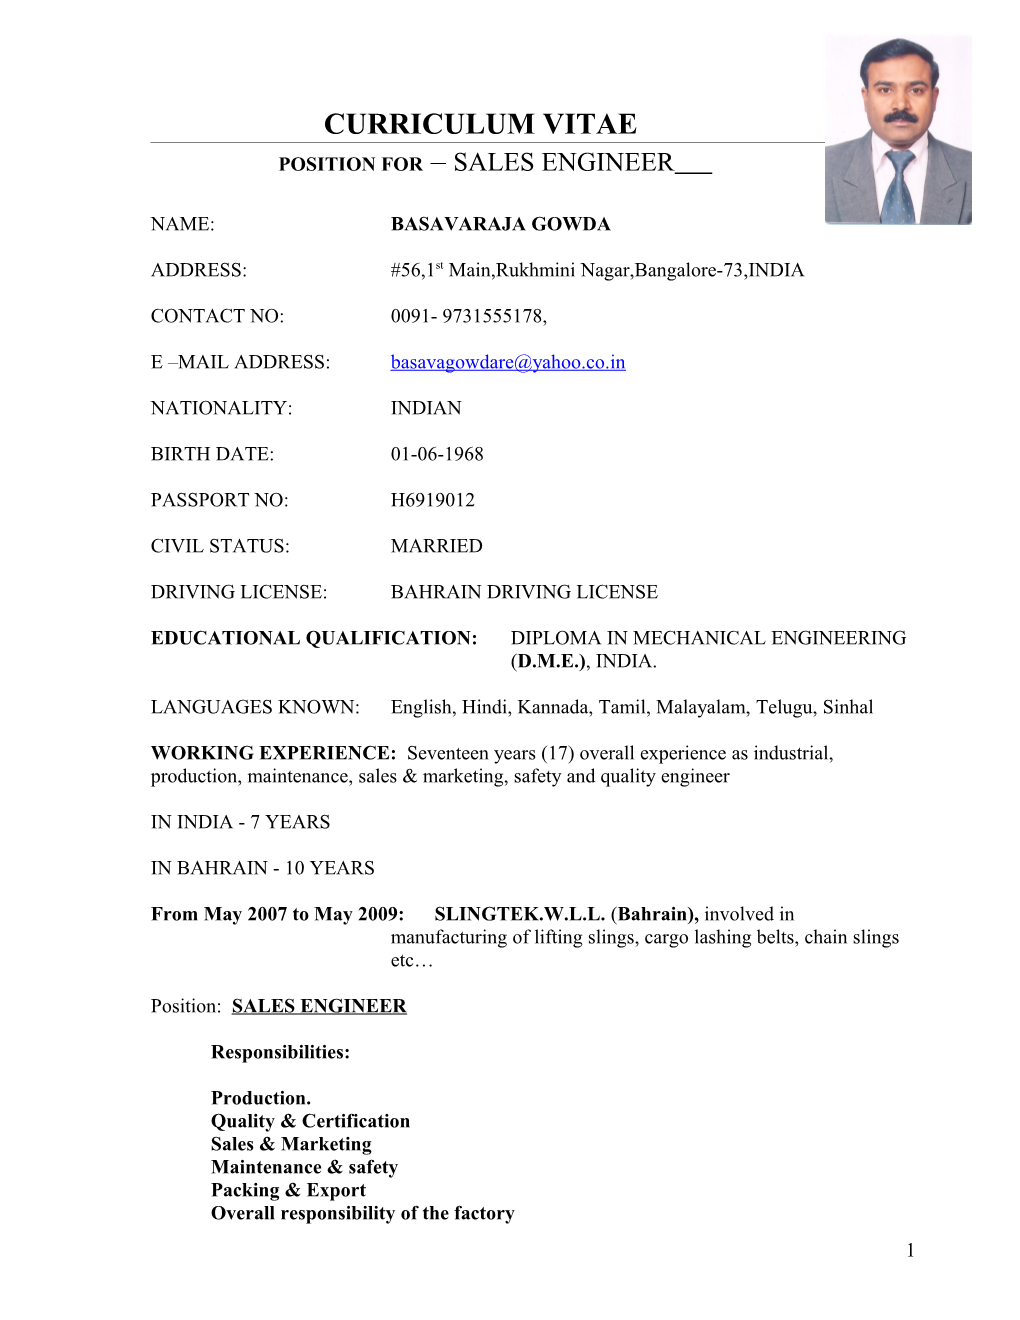 Application for the Suitable Job